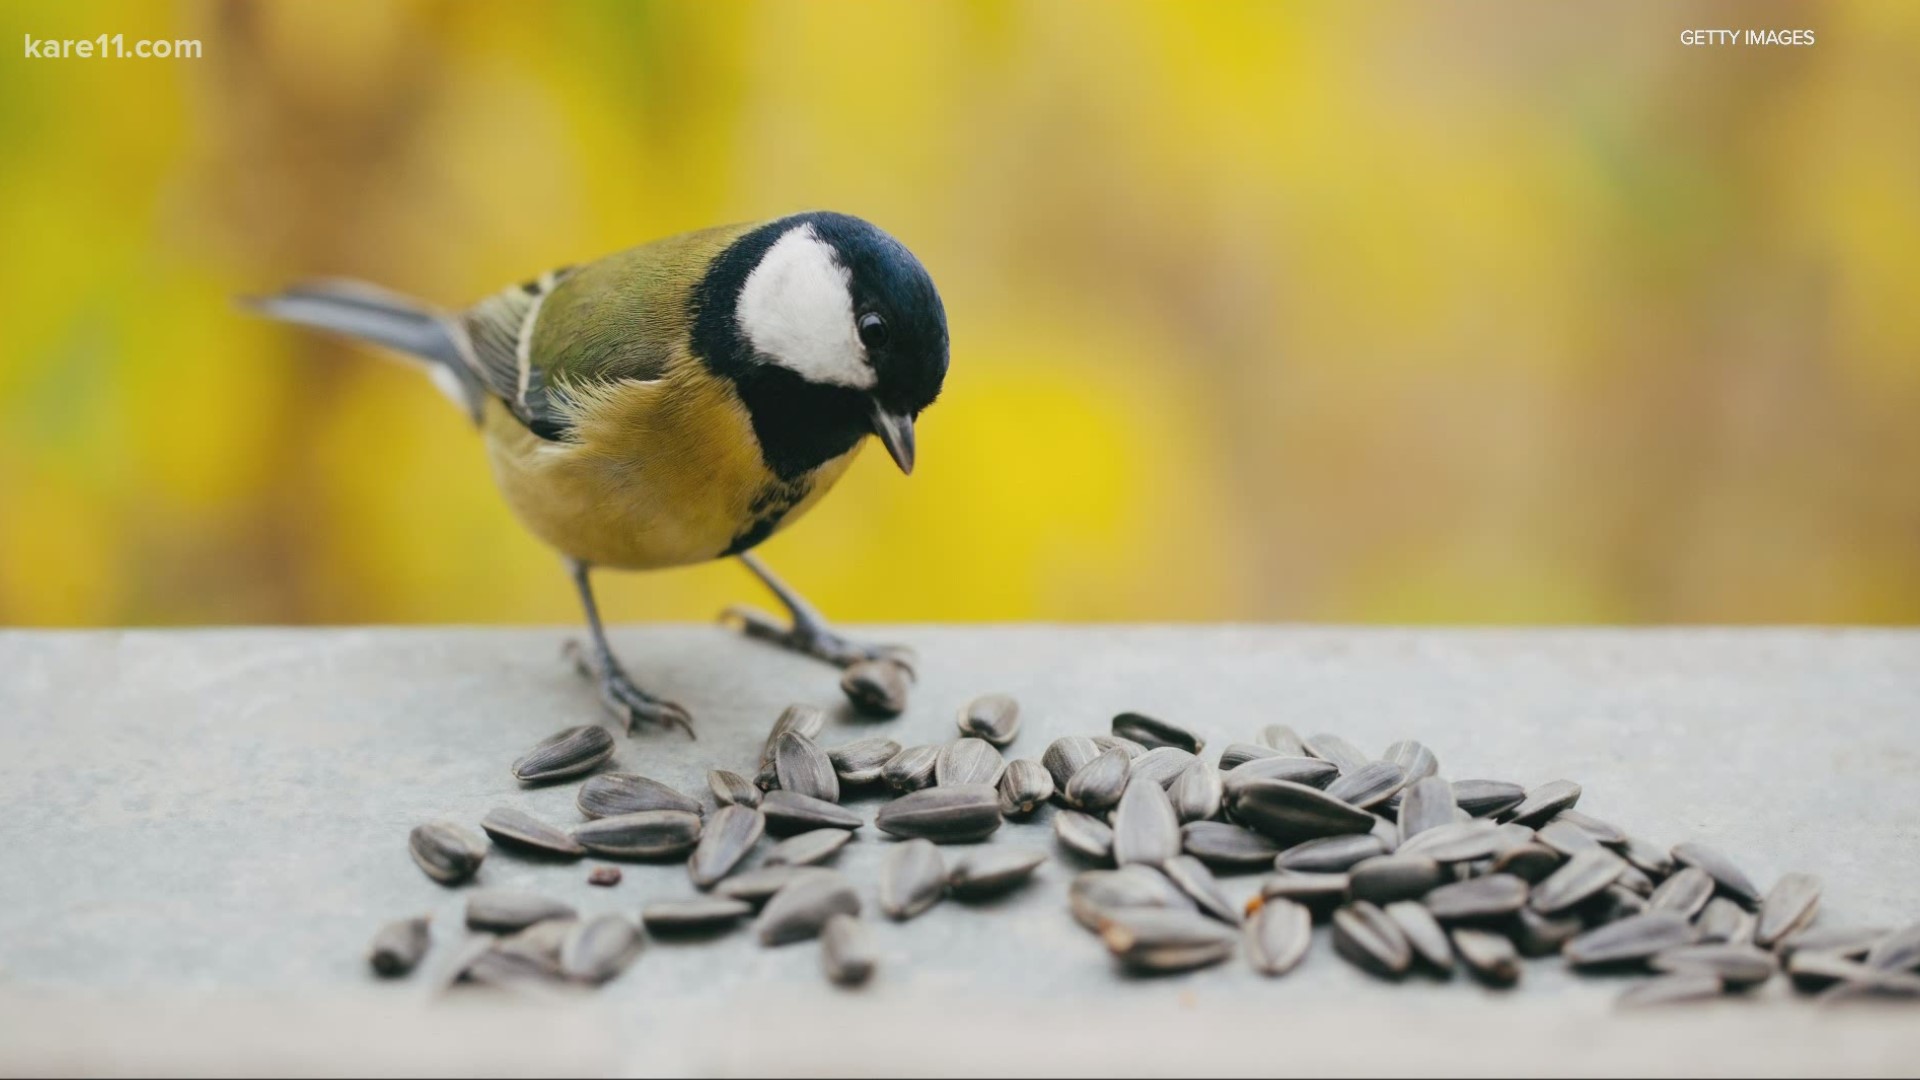 Raise your hand if you’re a bird nerd! Birdseed is expensive! But growing your own birdseed is totally doable. We have a few plant suggestions.